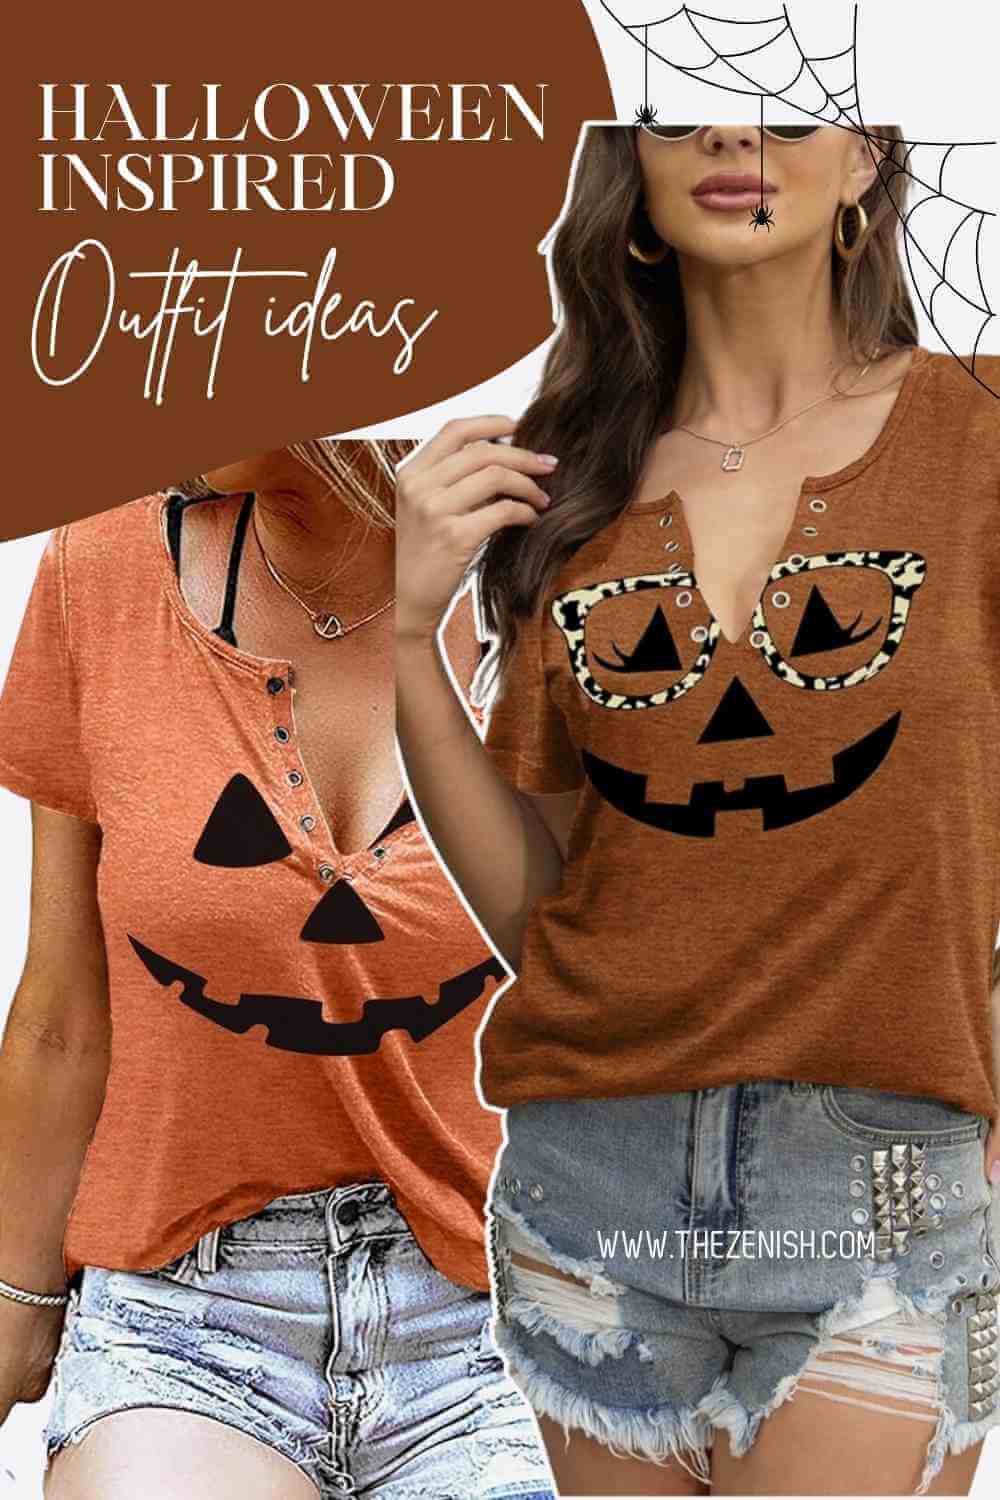 13 Spooktacular Halloween Inspired Outfit Ideas 6 13 Spooktacular Halloween Inspired Outfit Ideas